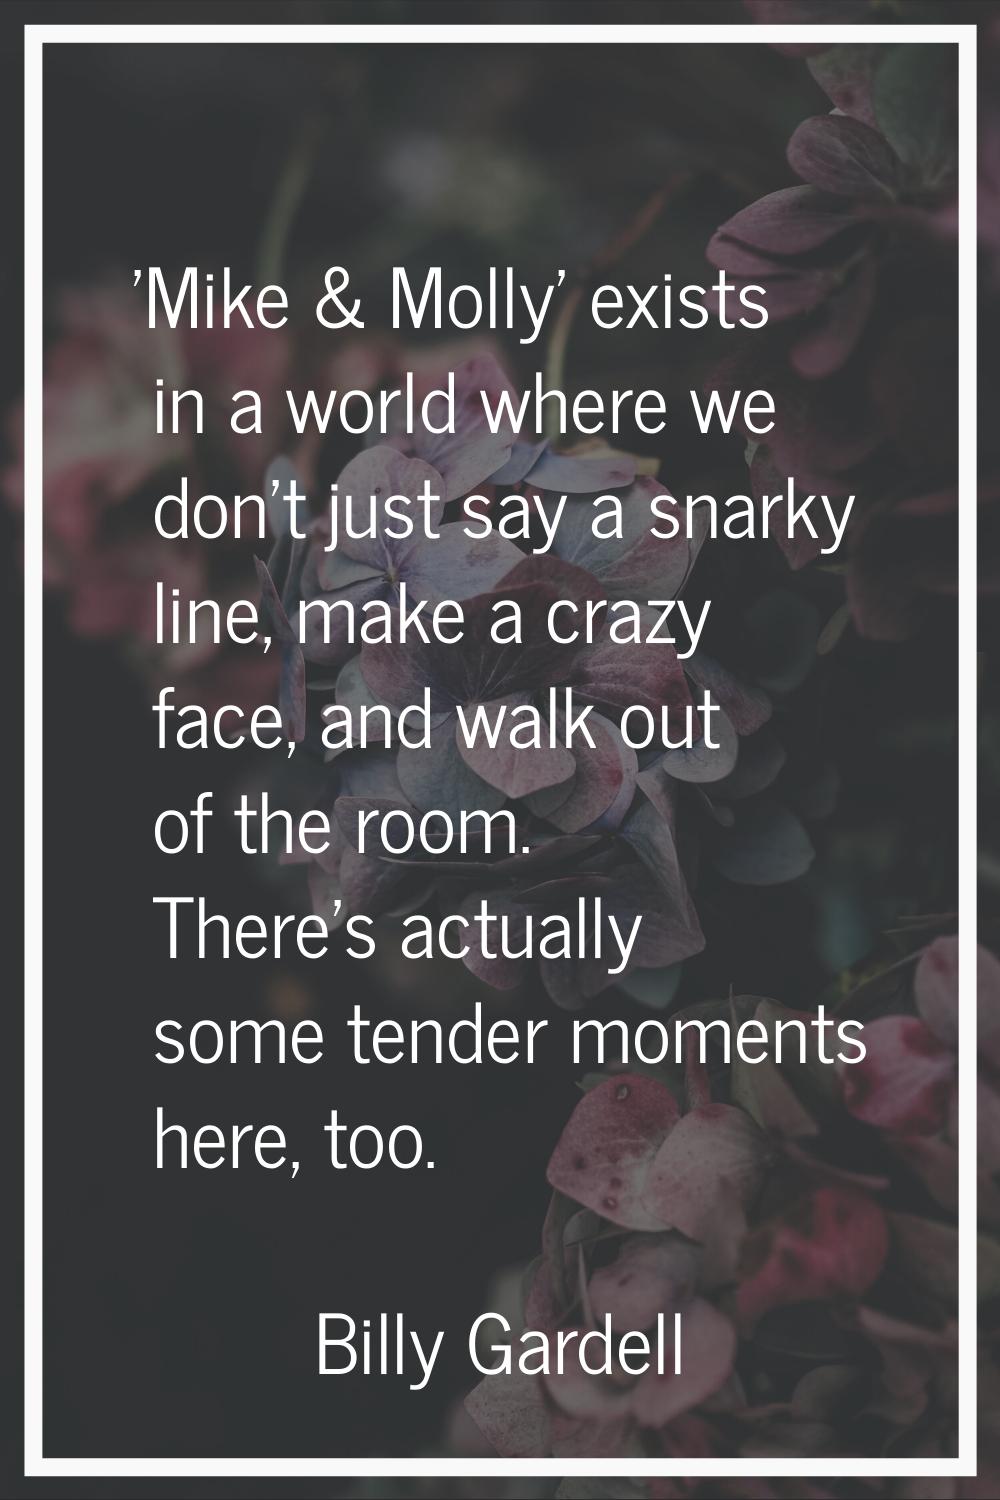 'Mike & Molly' exists in a world where we don't just say a snarky line, make a crazy face, and walk